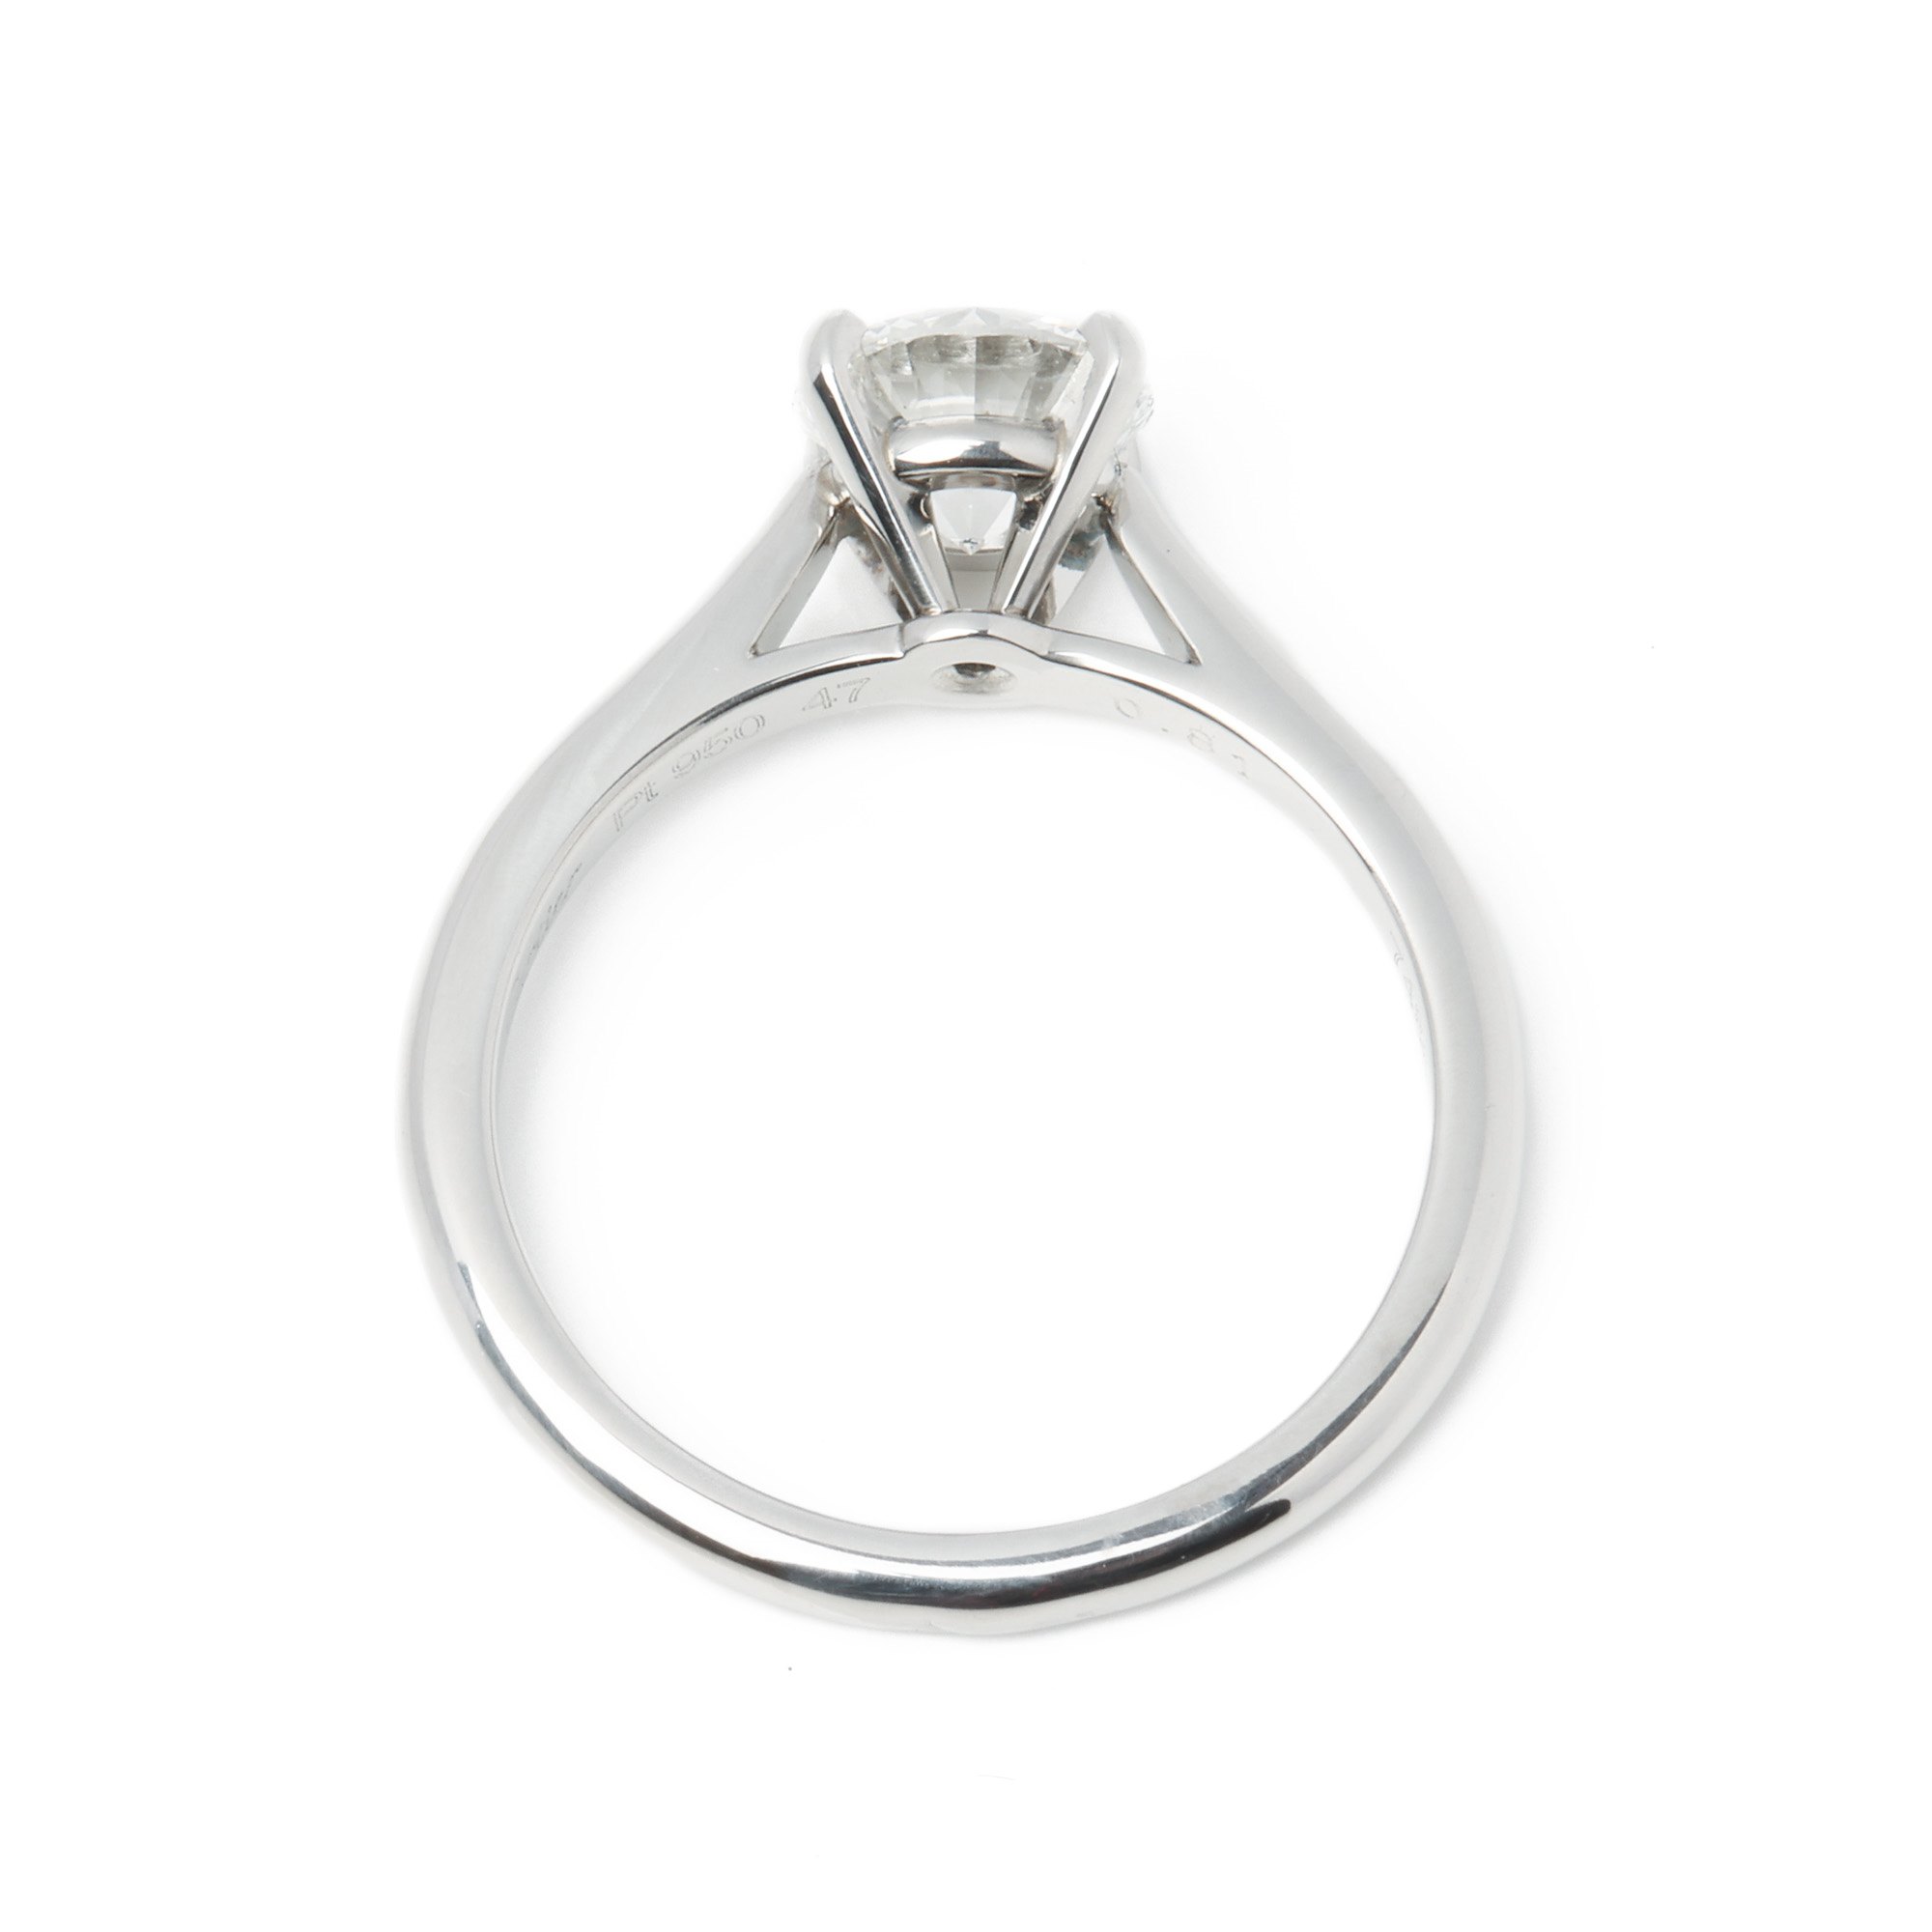 Cartier 0.81ct Round Solitaire Diamond Ring